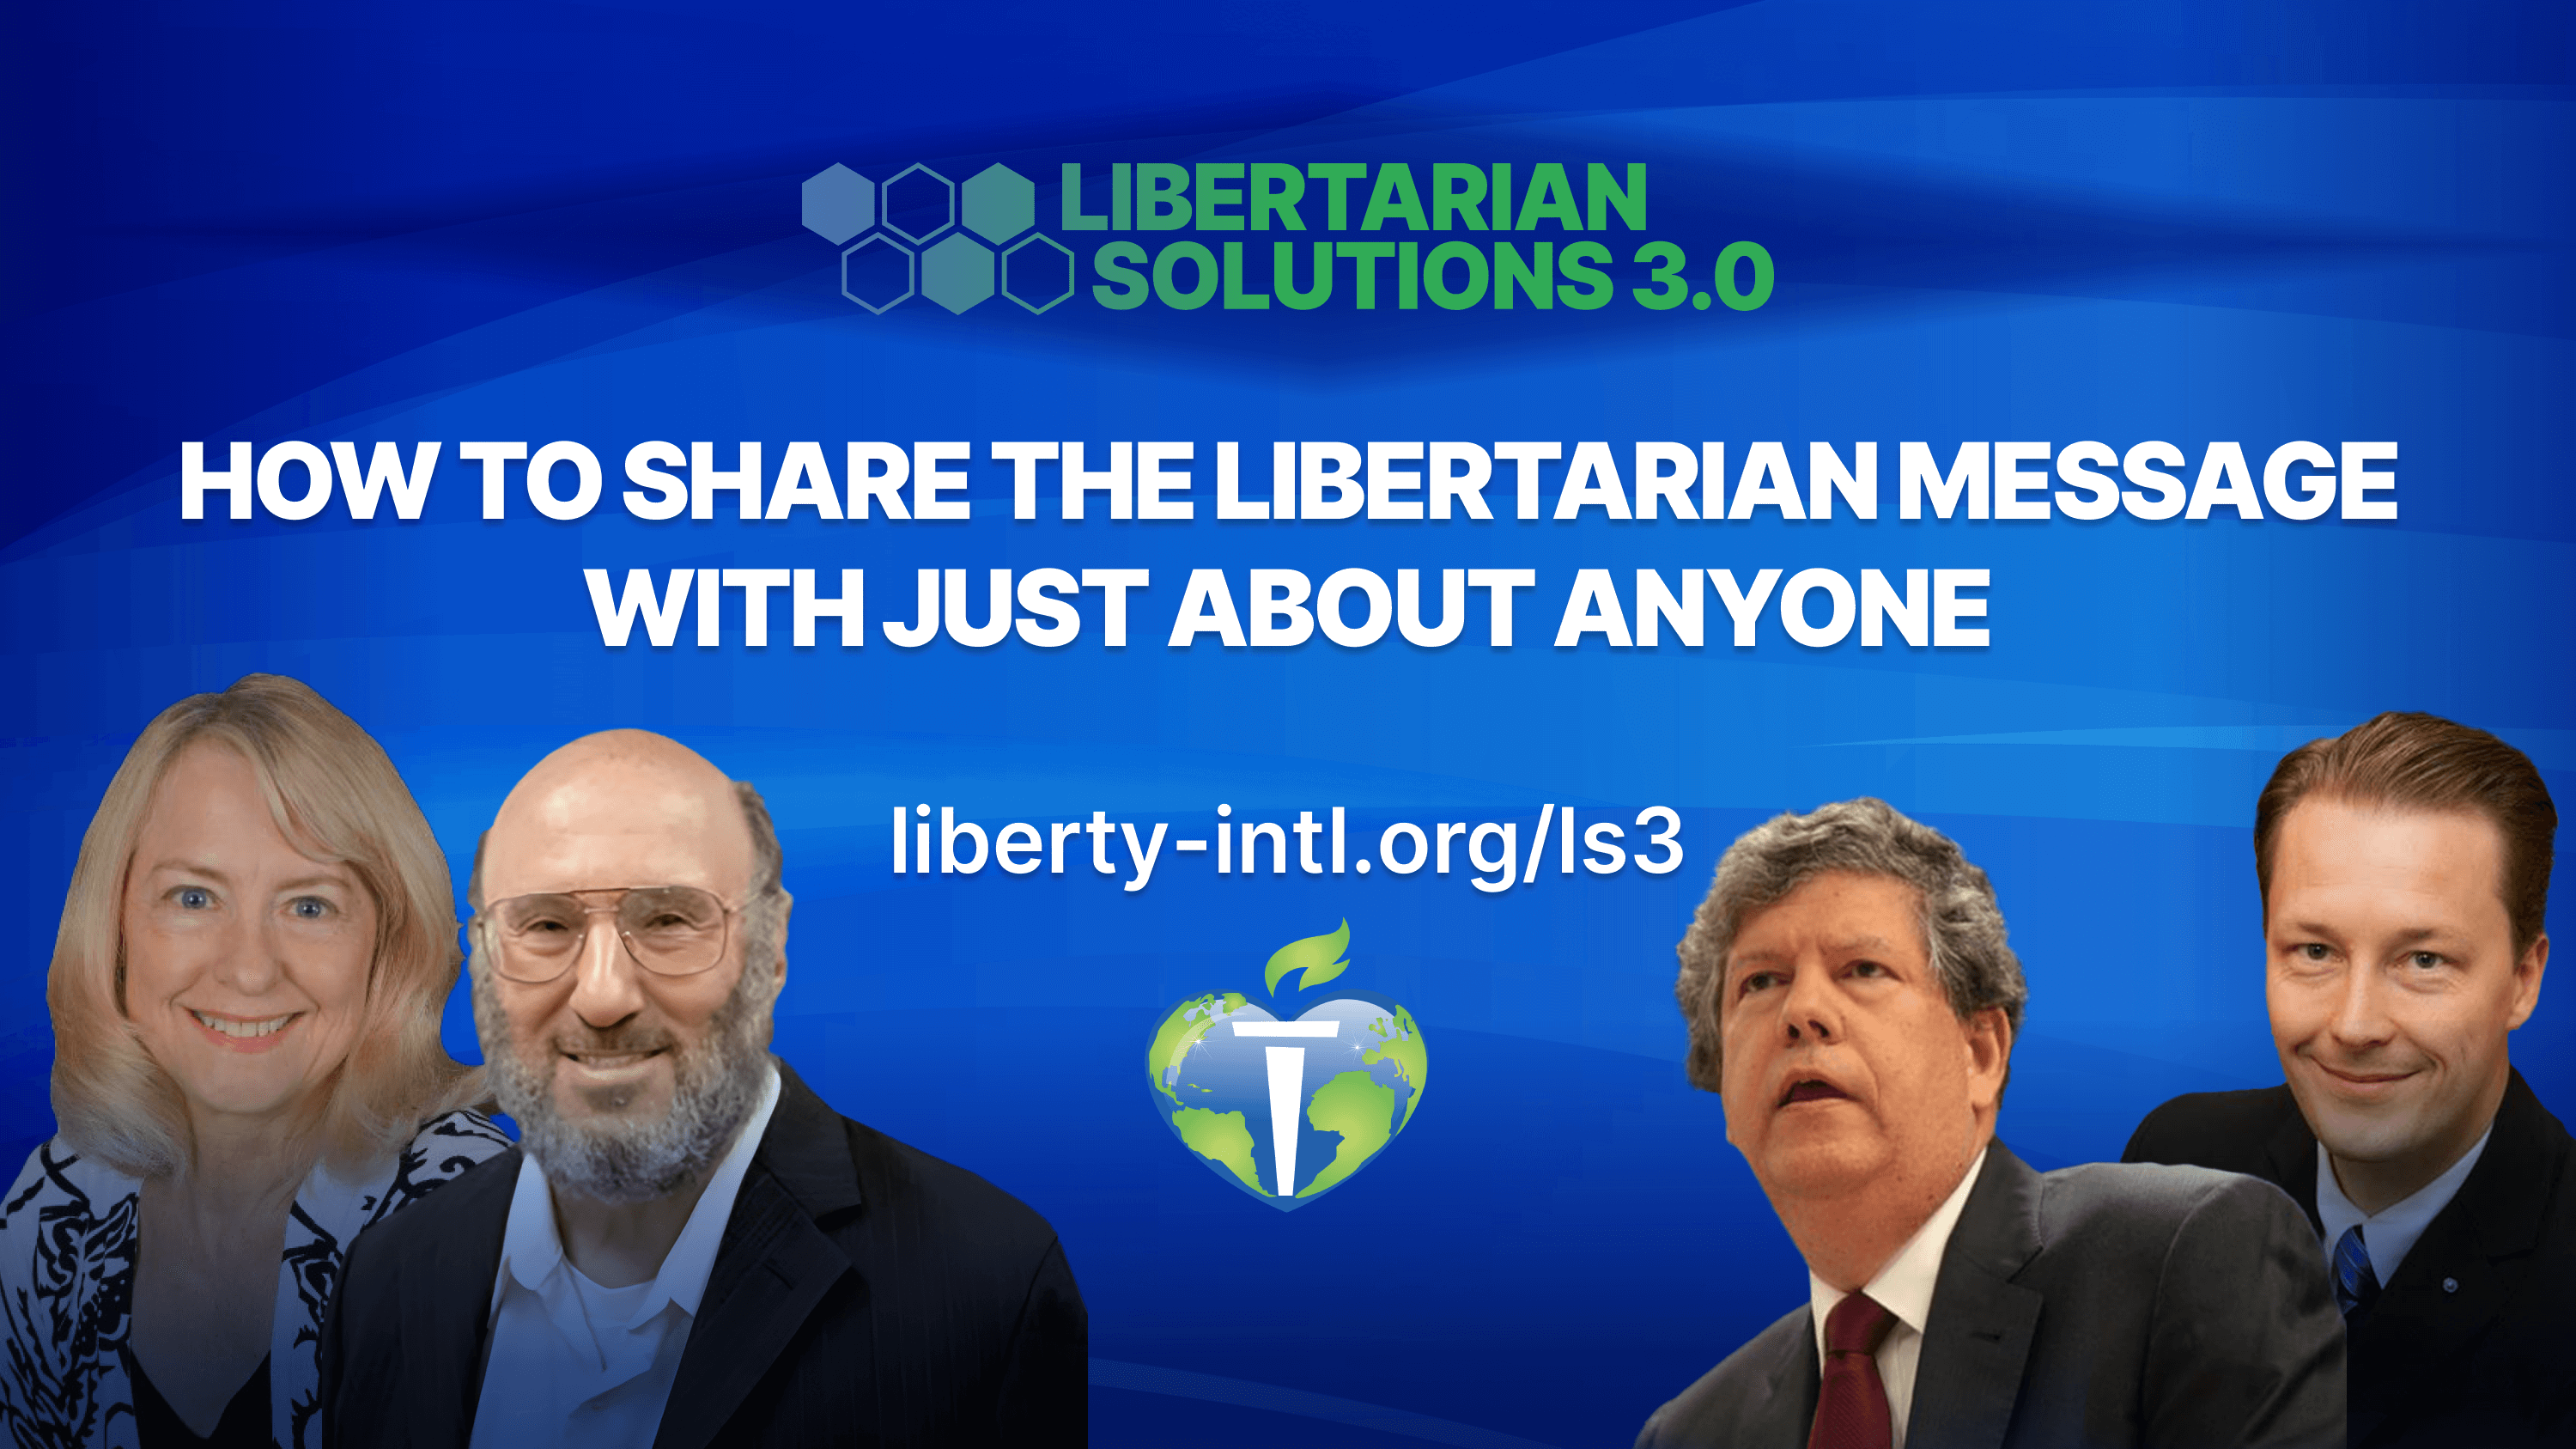 Our bestselling online learning course is back! Enroll in Libertarian Solutions 3.0 and win prizes!